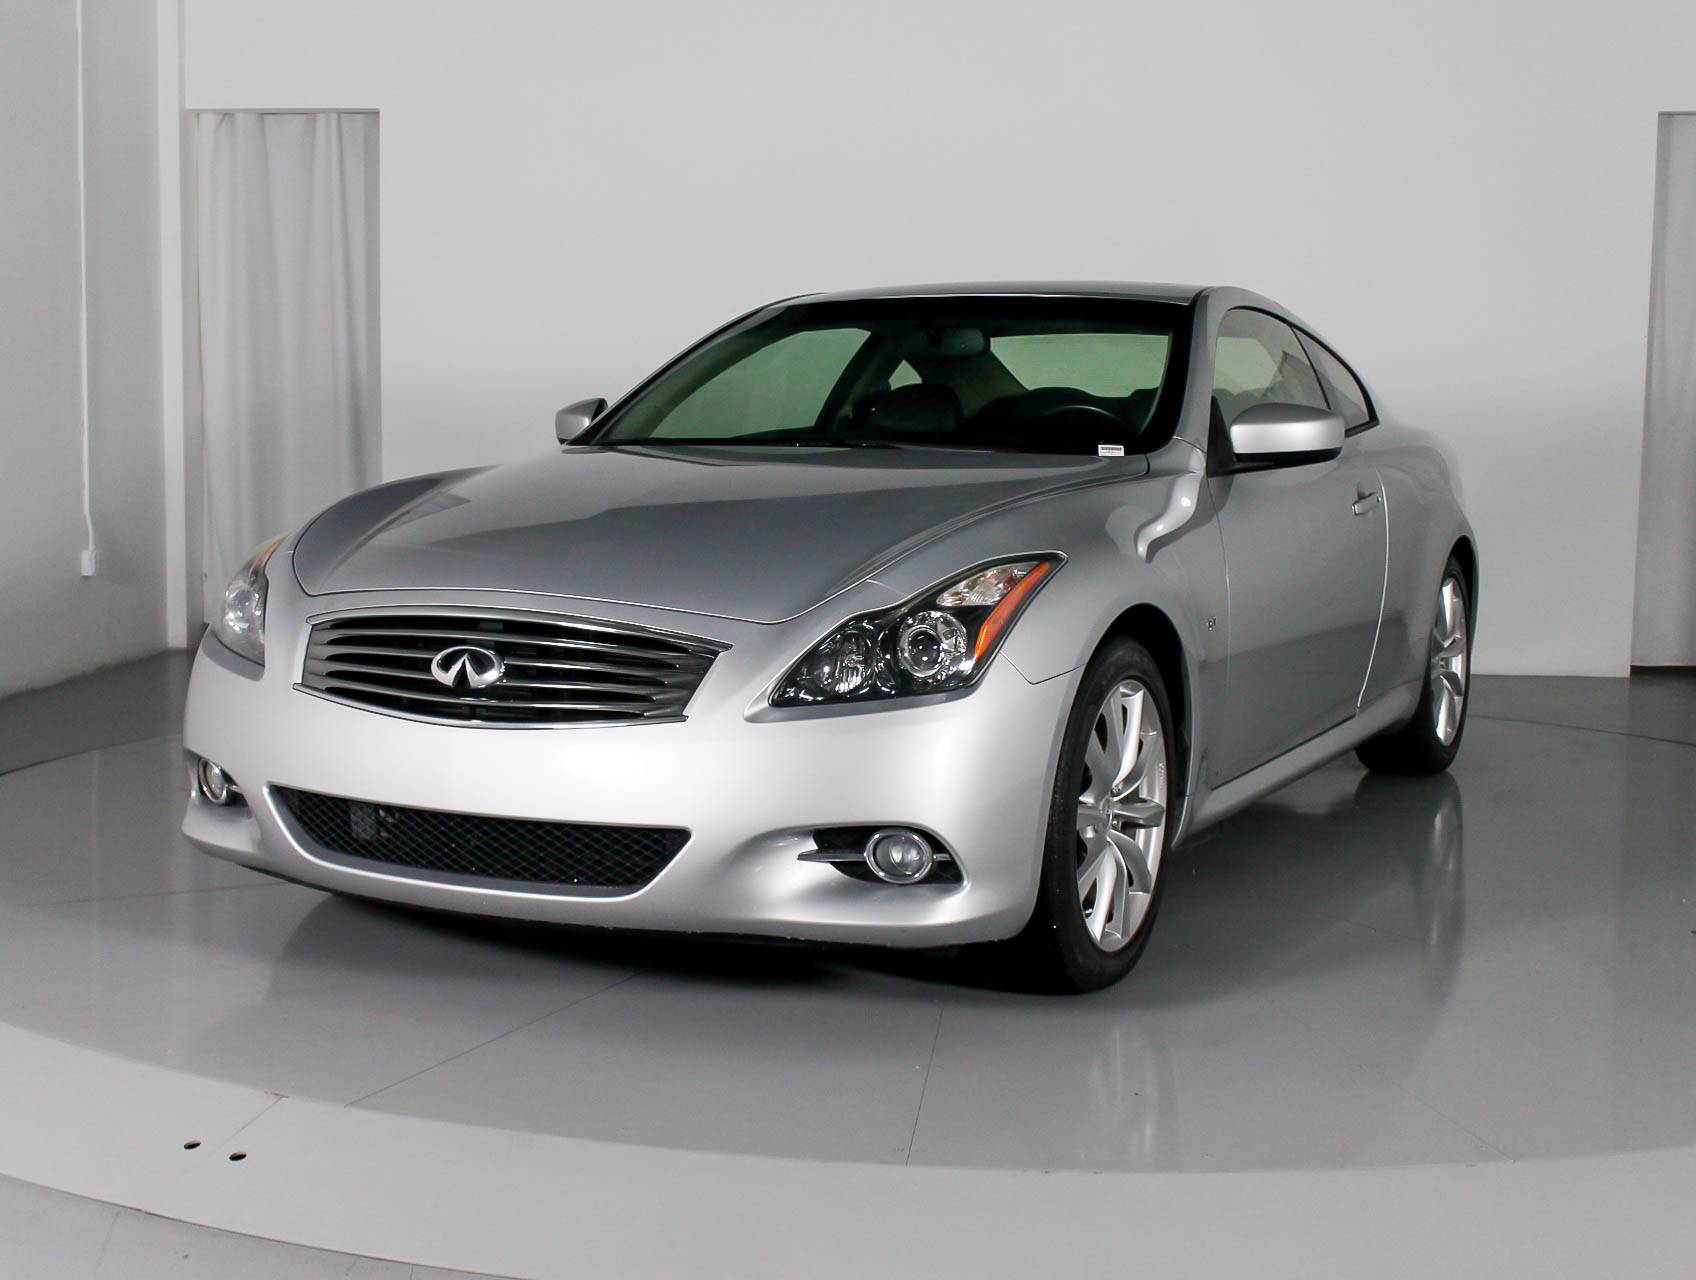 Used 2014 INFINITI Q60 Journey for sale in MARGATE | 99768